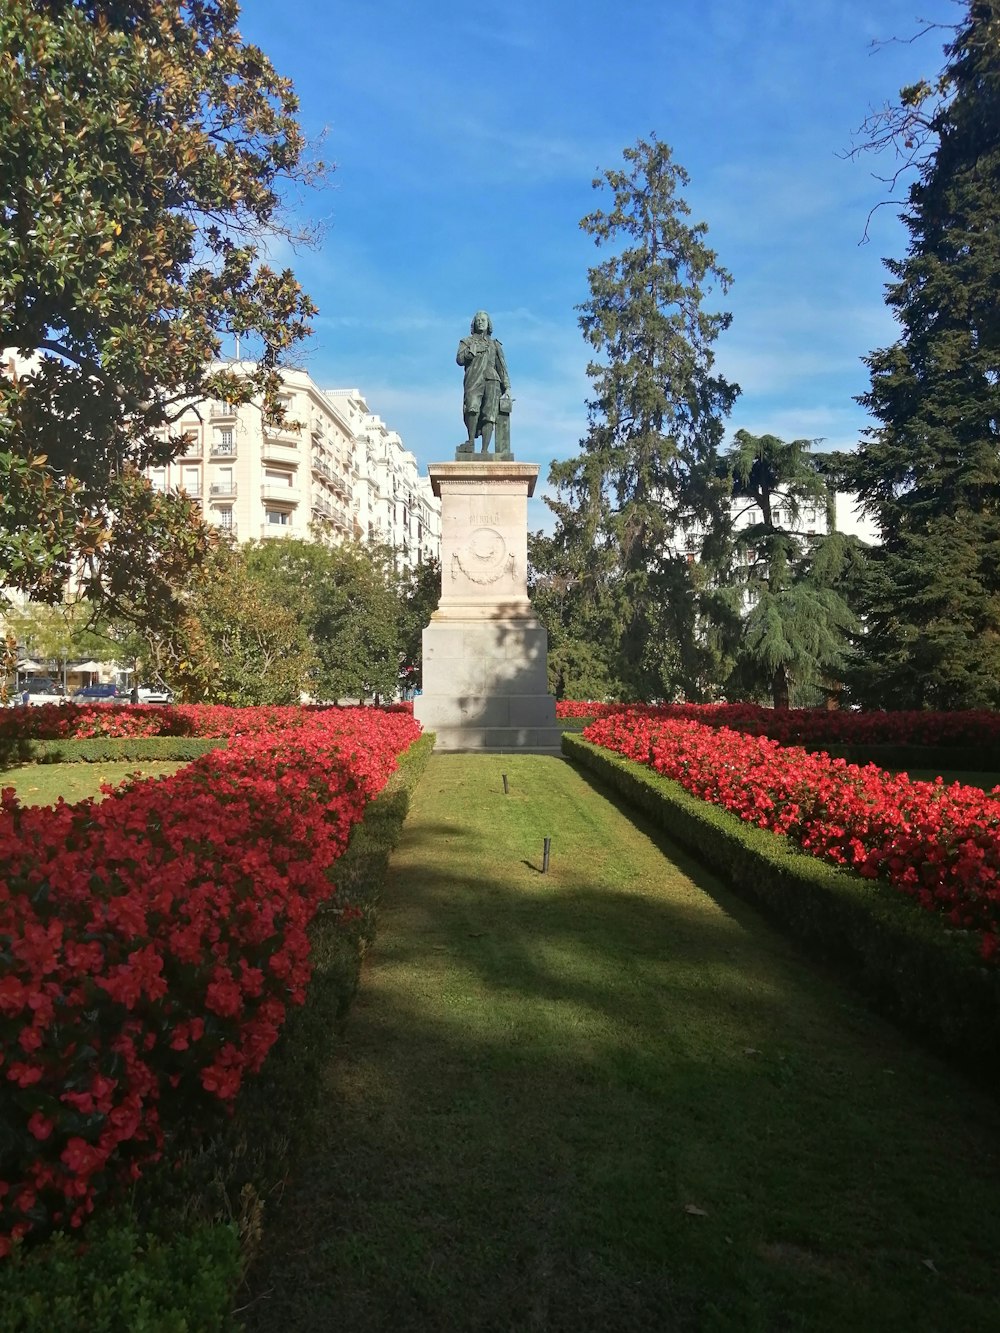 a statue in the middle of a flower garden